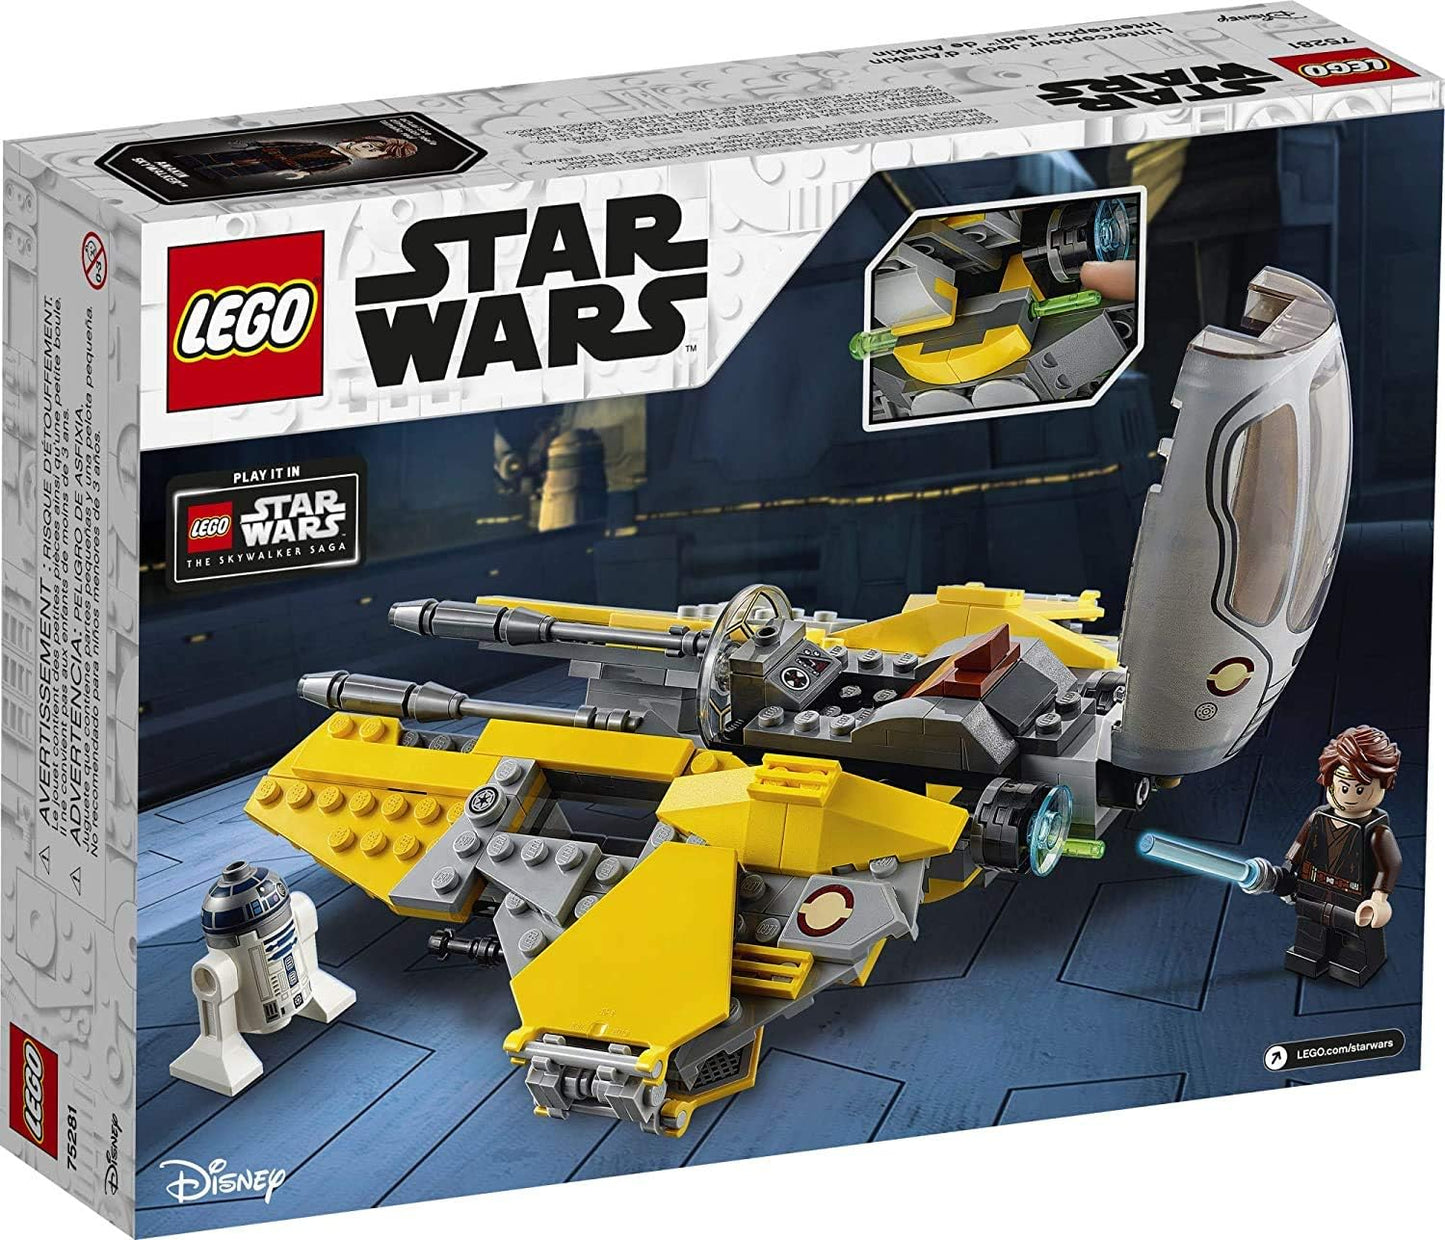 LEGO Star Wars Anakin’s Jedi Interceptor 75281 Building Toy for Kids, Anakin Skywalker Set to Role-Play Star Wars: Revenge of the Sith and Star Wars: The Clone Wars Action (248 Pieces)